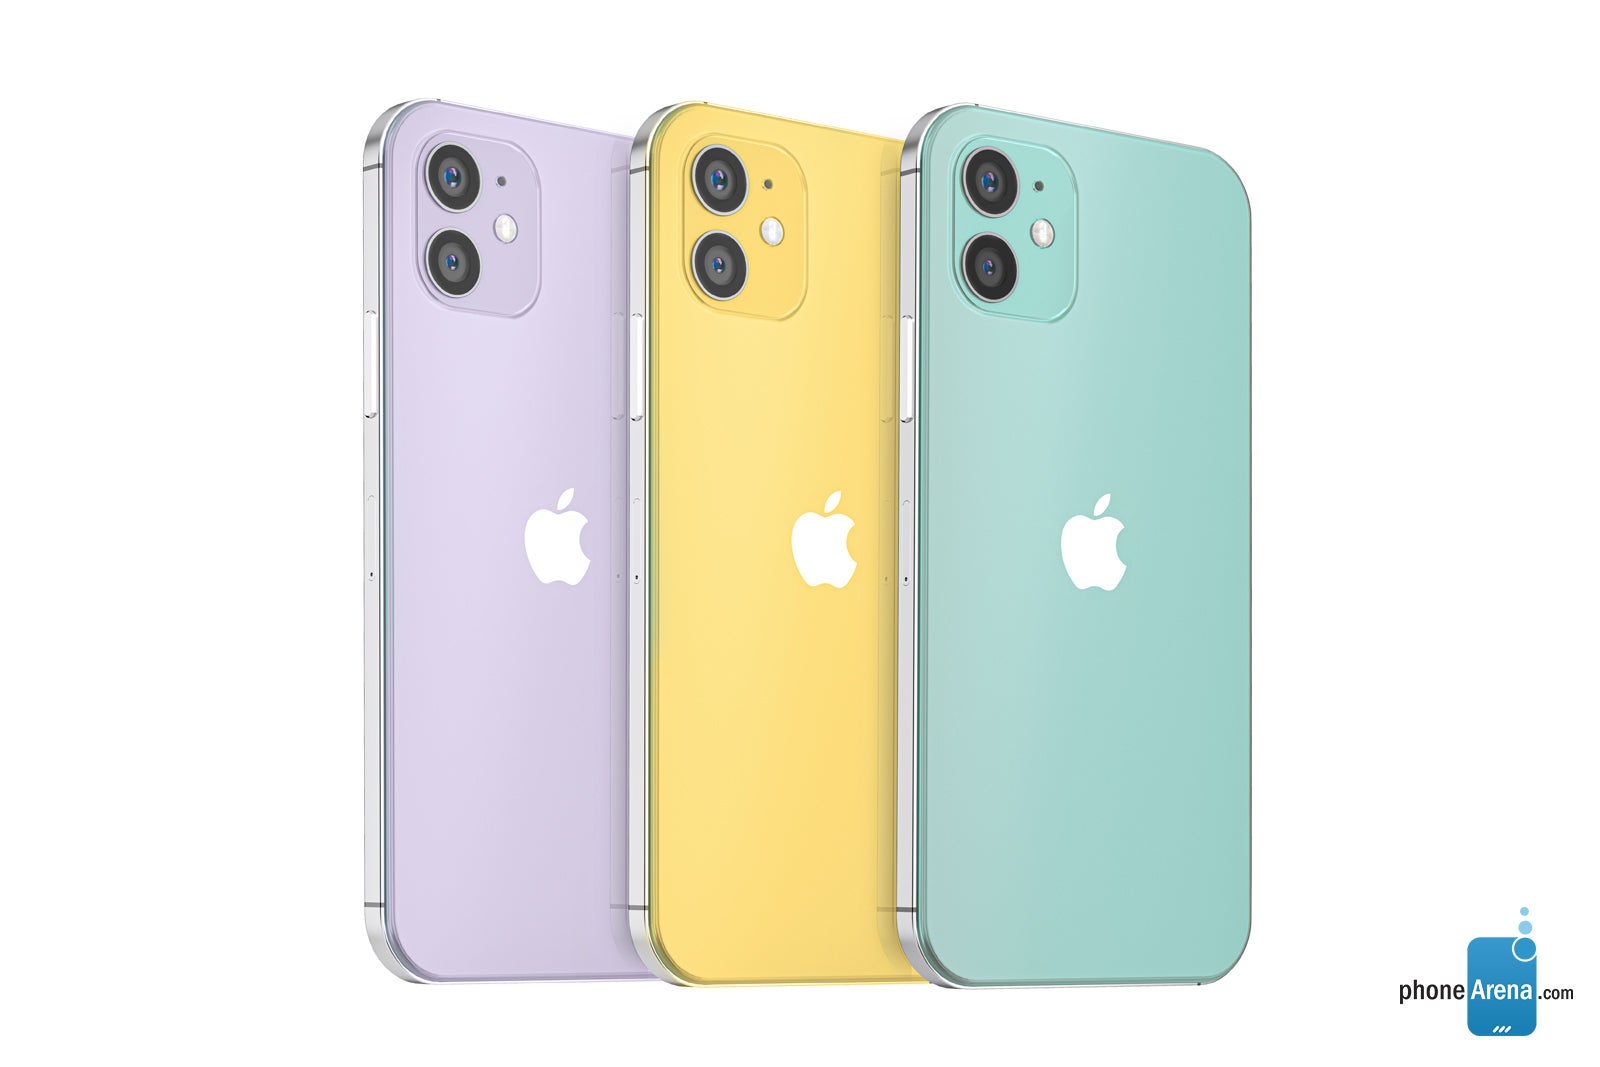 The boxy aesthetic of the iPhone 4 and iPhone 5 is poised to return on the new 2020 iPhone models - Apple's 2020 iPhone 12 lineup pictured in beautiful design renders